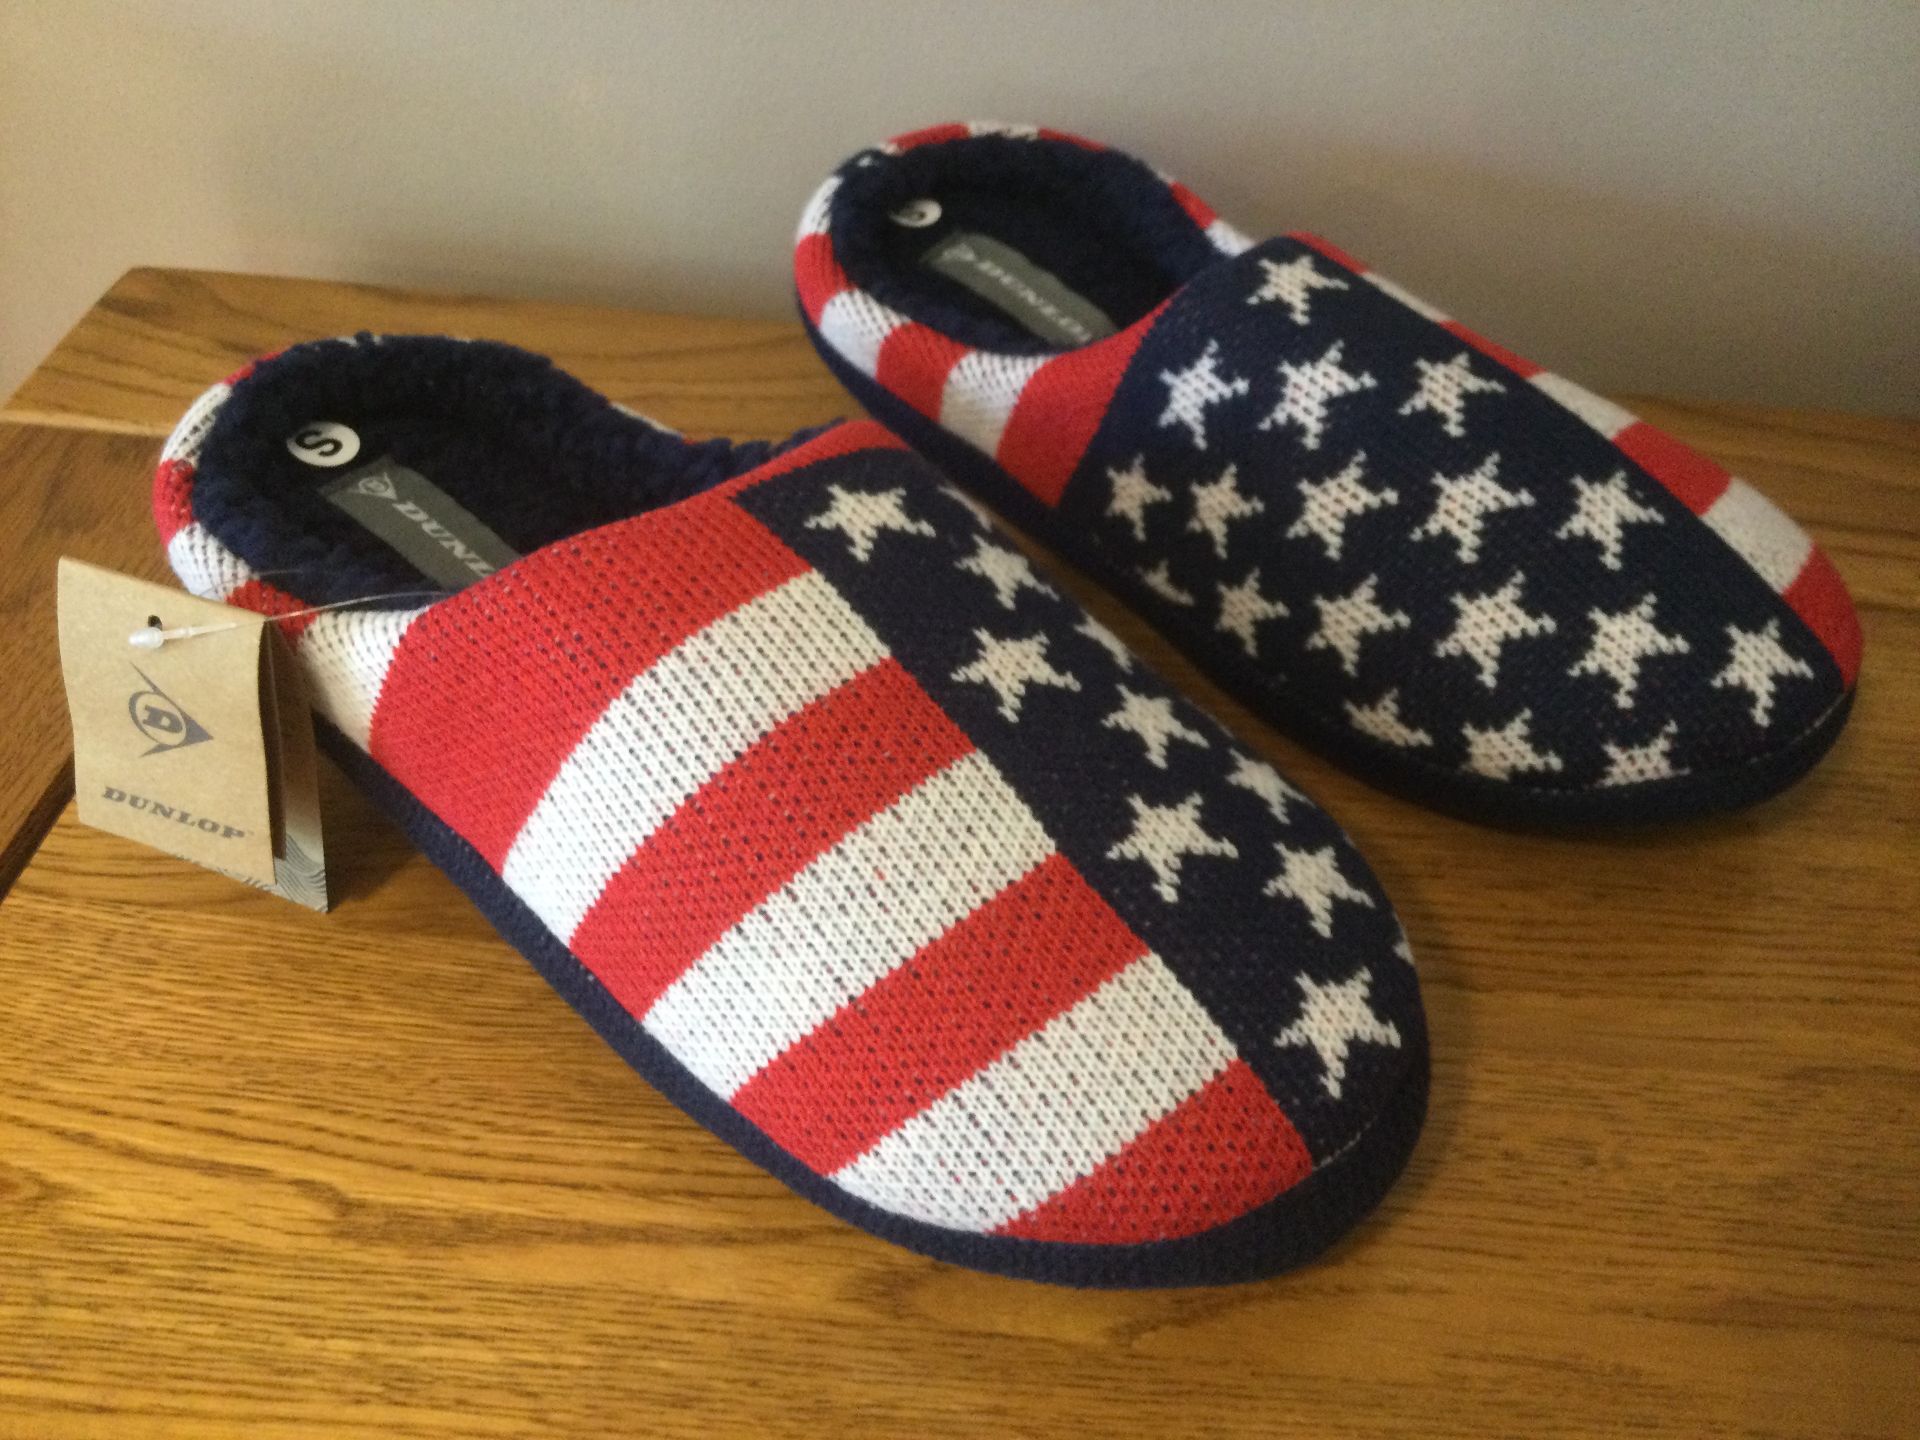 Job Lot 10 x Pairs Men's Dunlop, “USA Stars and Stripes” Memory Foam, Mule Slippers, Size S (6/7) - Image 3 of 6